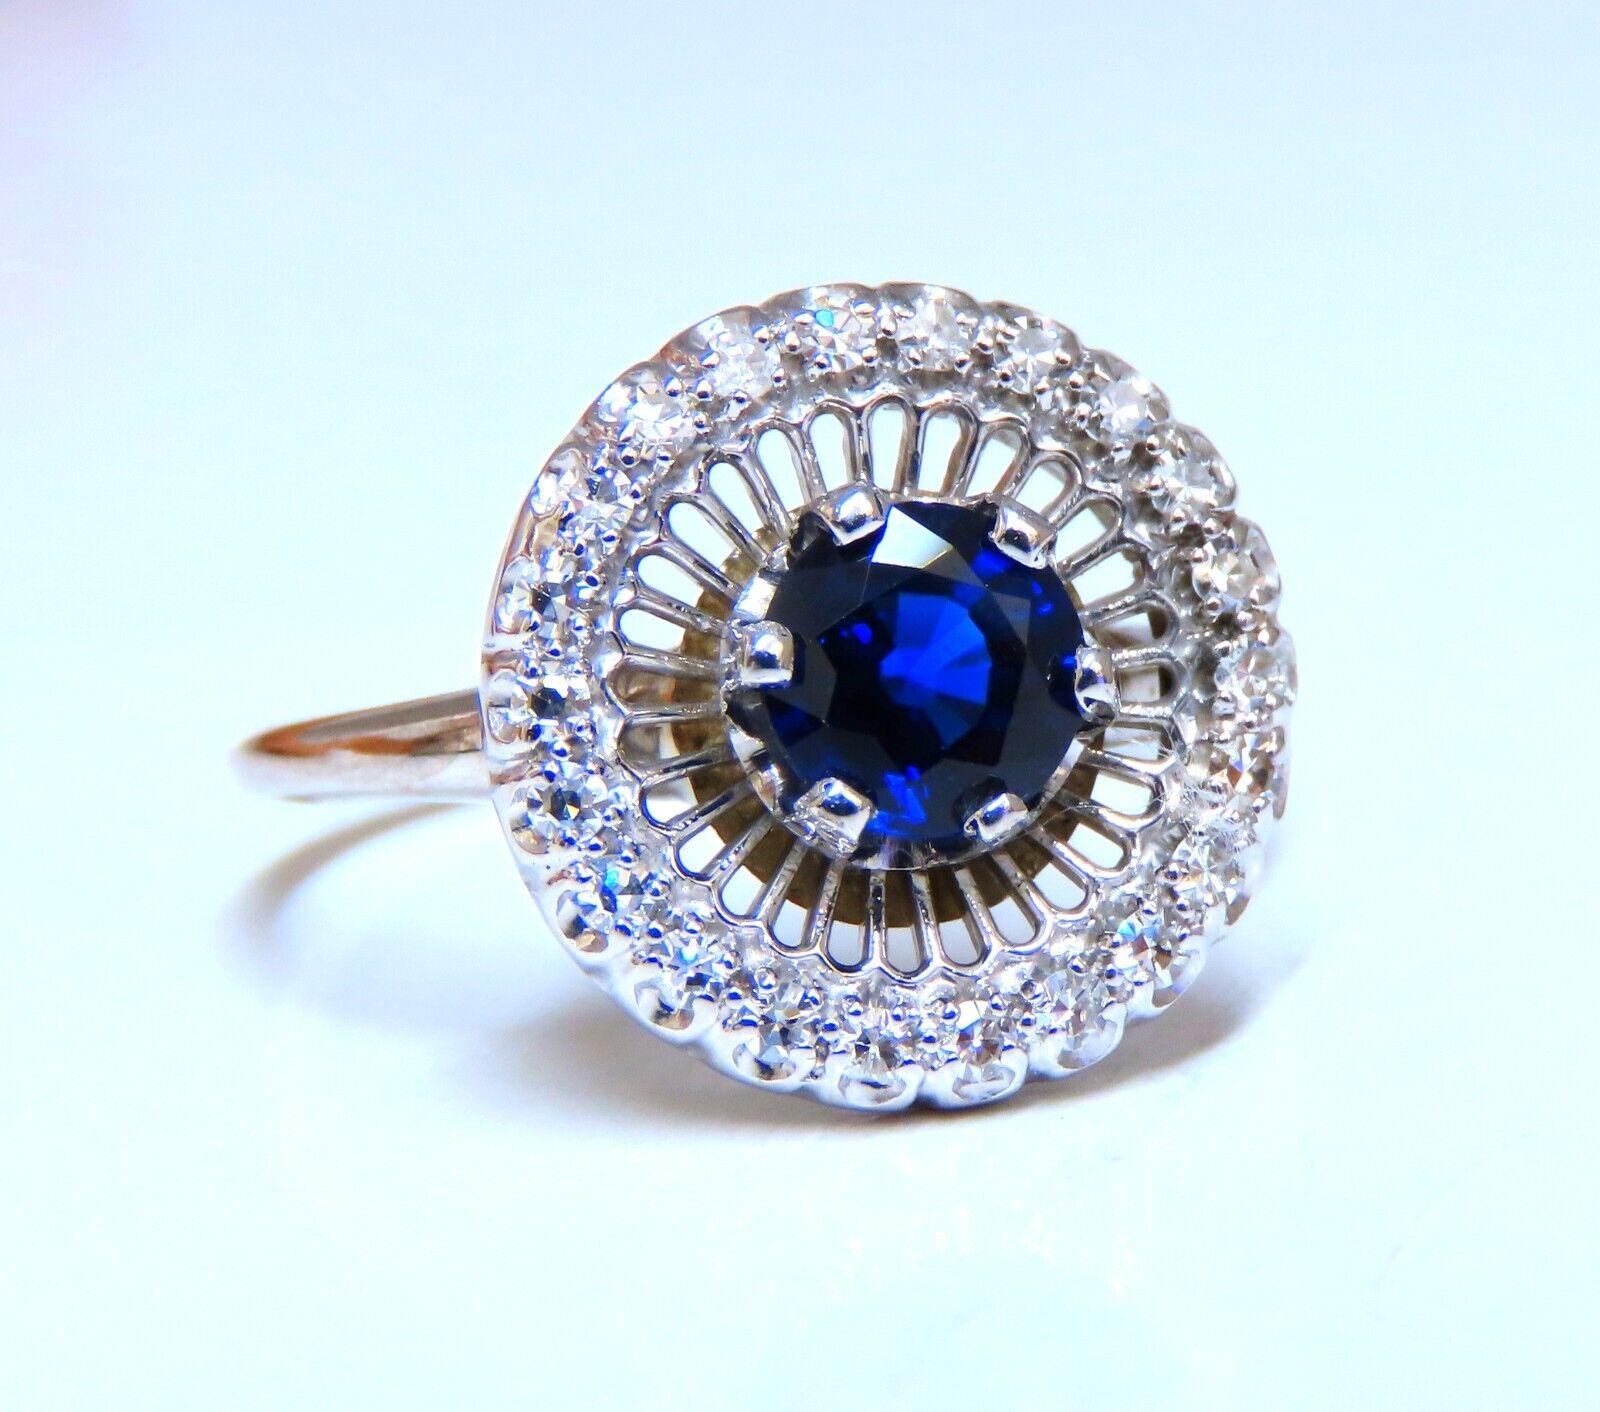 Natural sapphire diamond cocktail ring.

. 80ct. Natural round blue sapphires.

Vivid Royal blue, clean clarity and transparent.

. 50ct natural round diamonds, h color vs2 clarity


14 karat white gold 4.8 grams

14.7 mm wide deck

Depth of ring 6